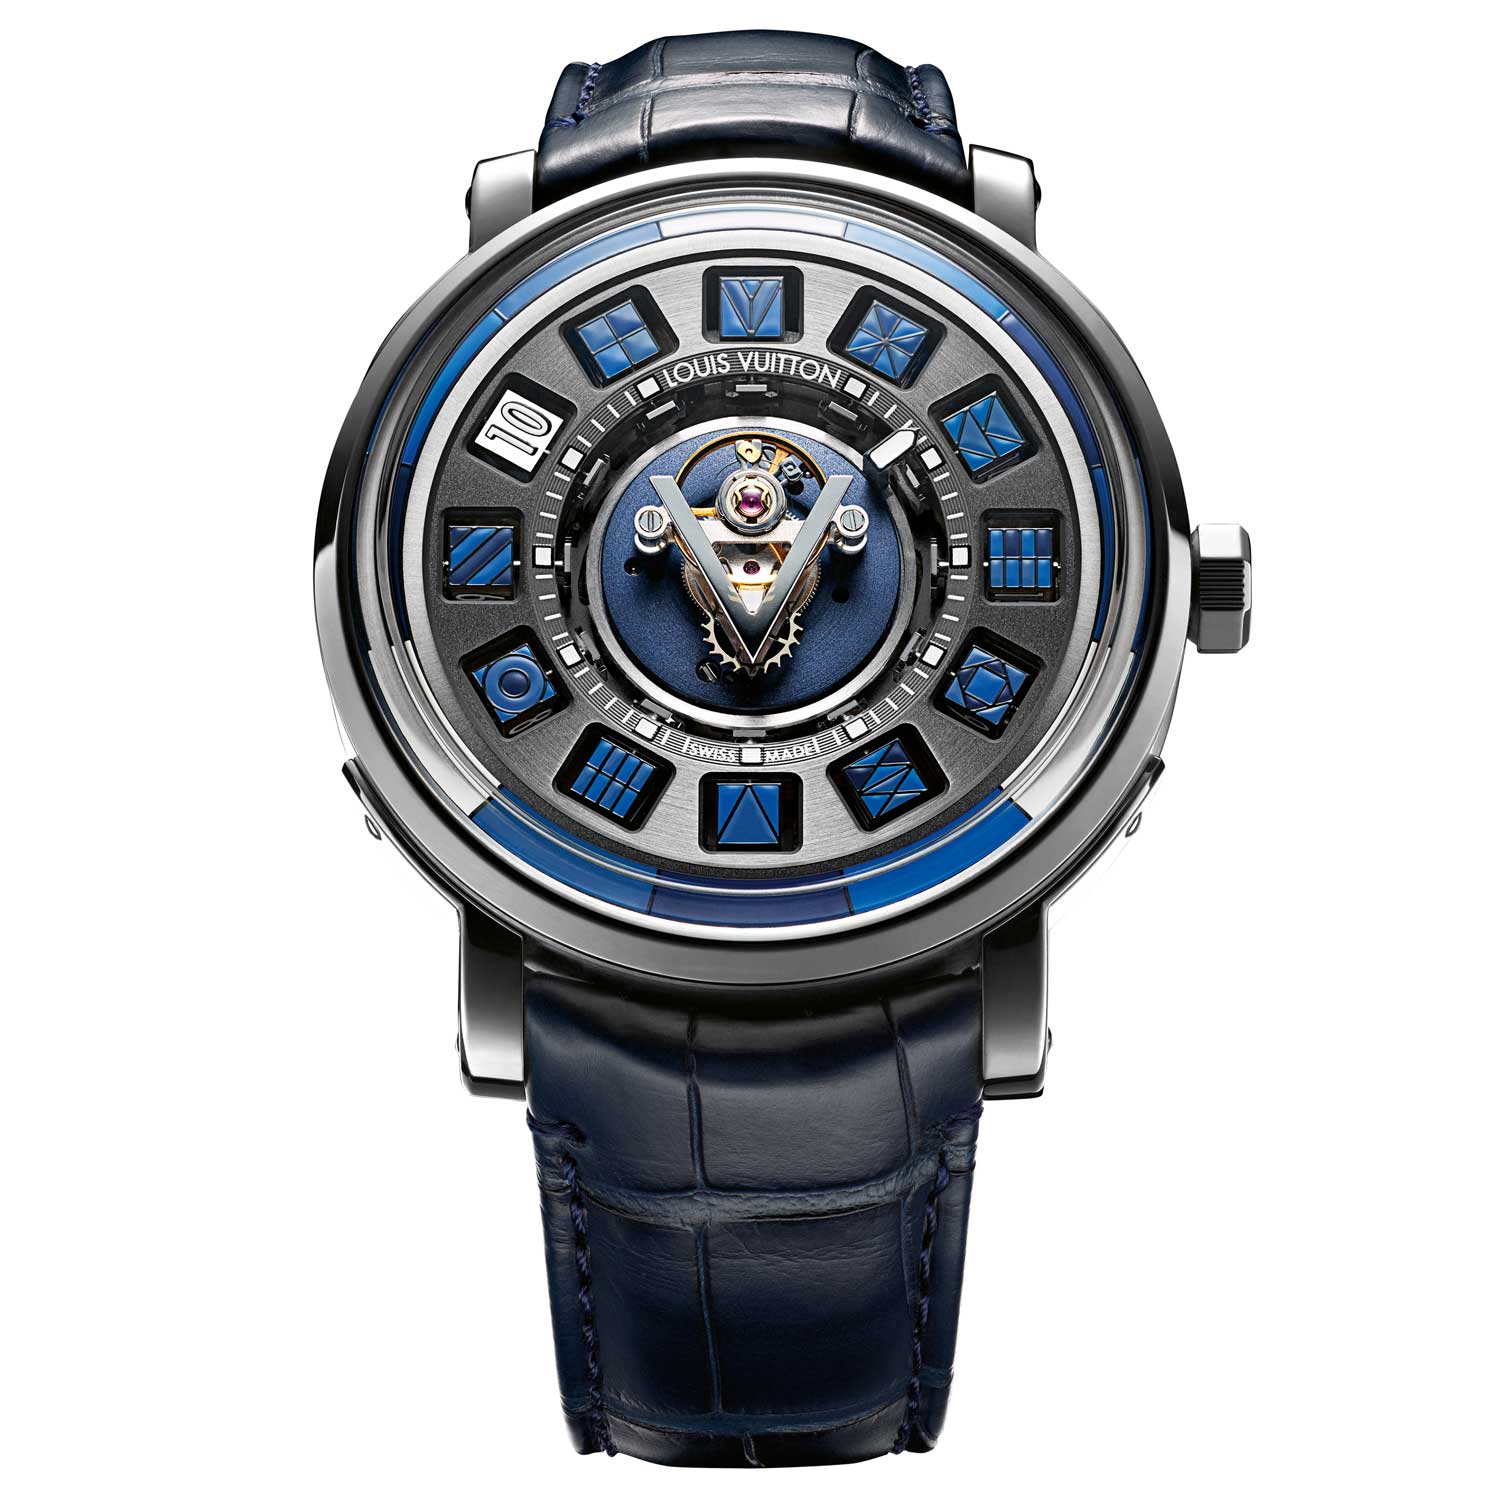 The Escale Spin Time Tourbillon Central Blue, features a flying tourbillon in the center with a V-shaped carriage surrounded by 12 cubes that rotate to show the hour